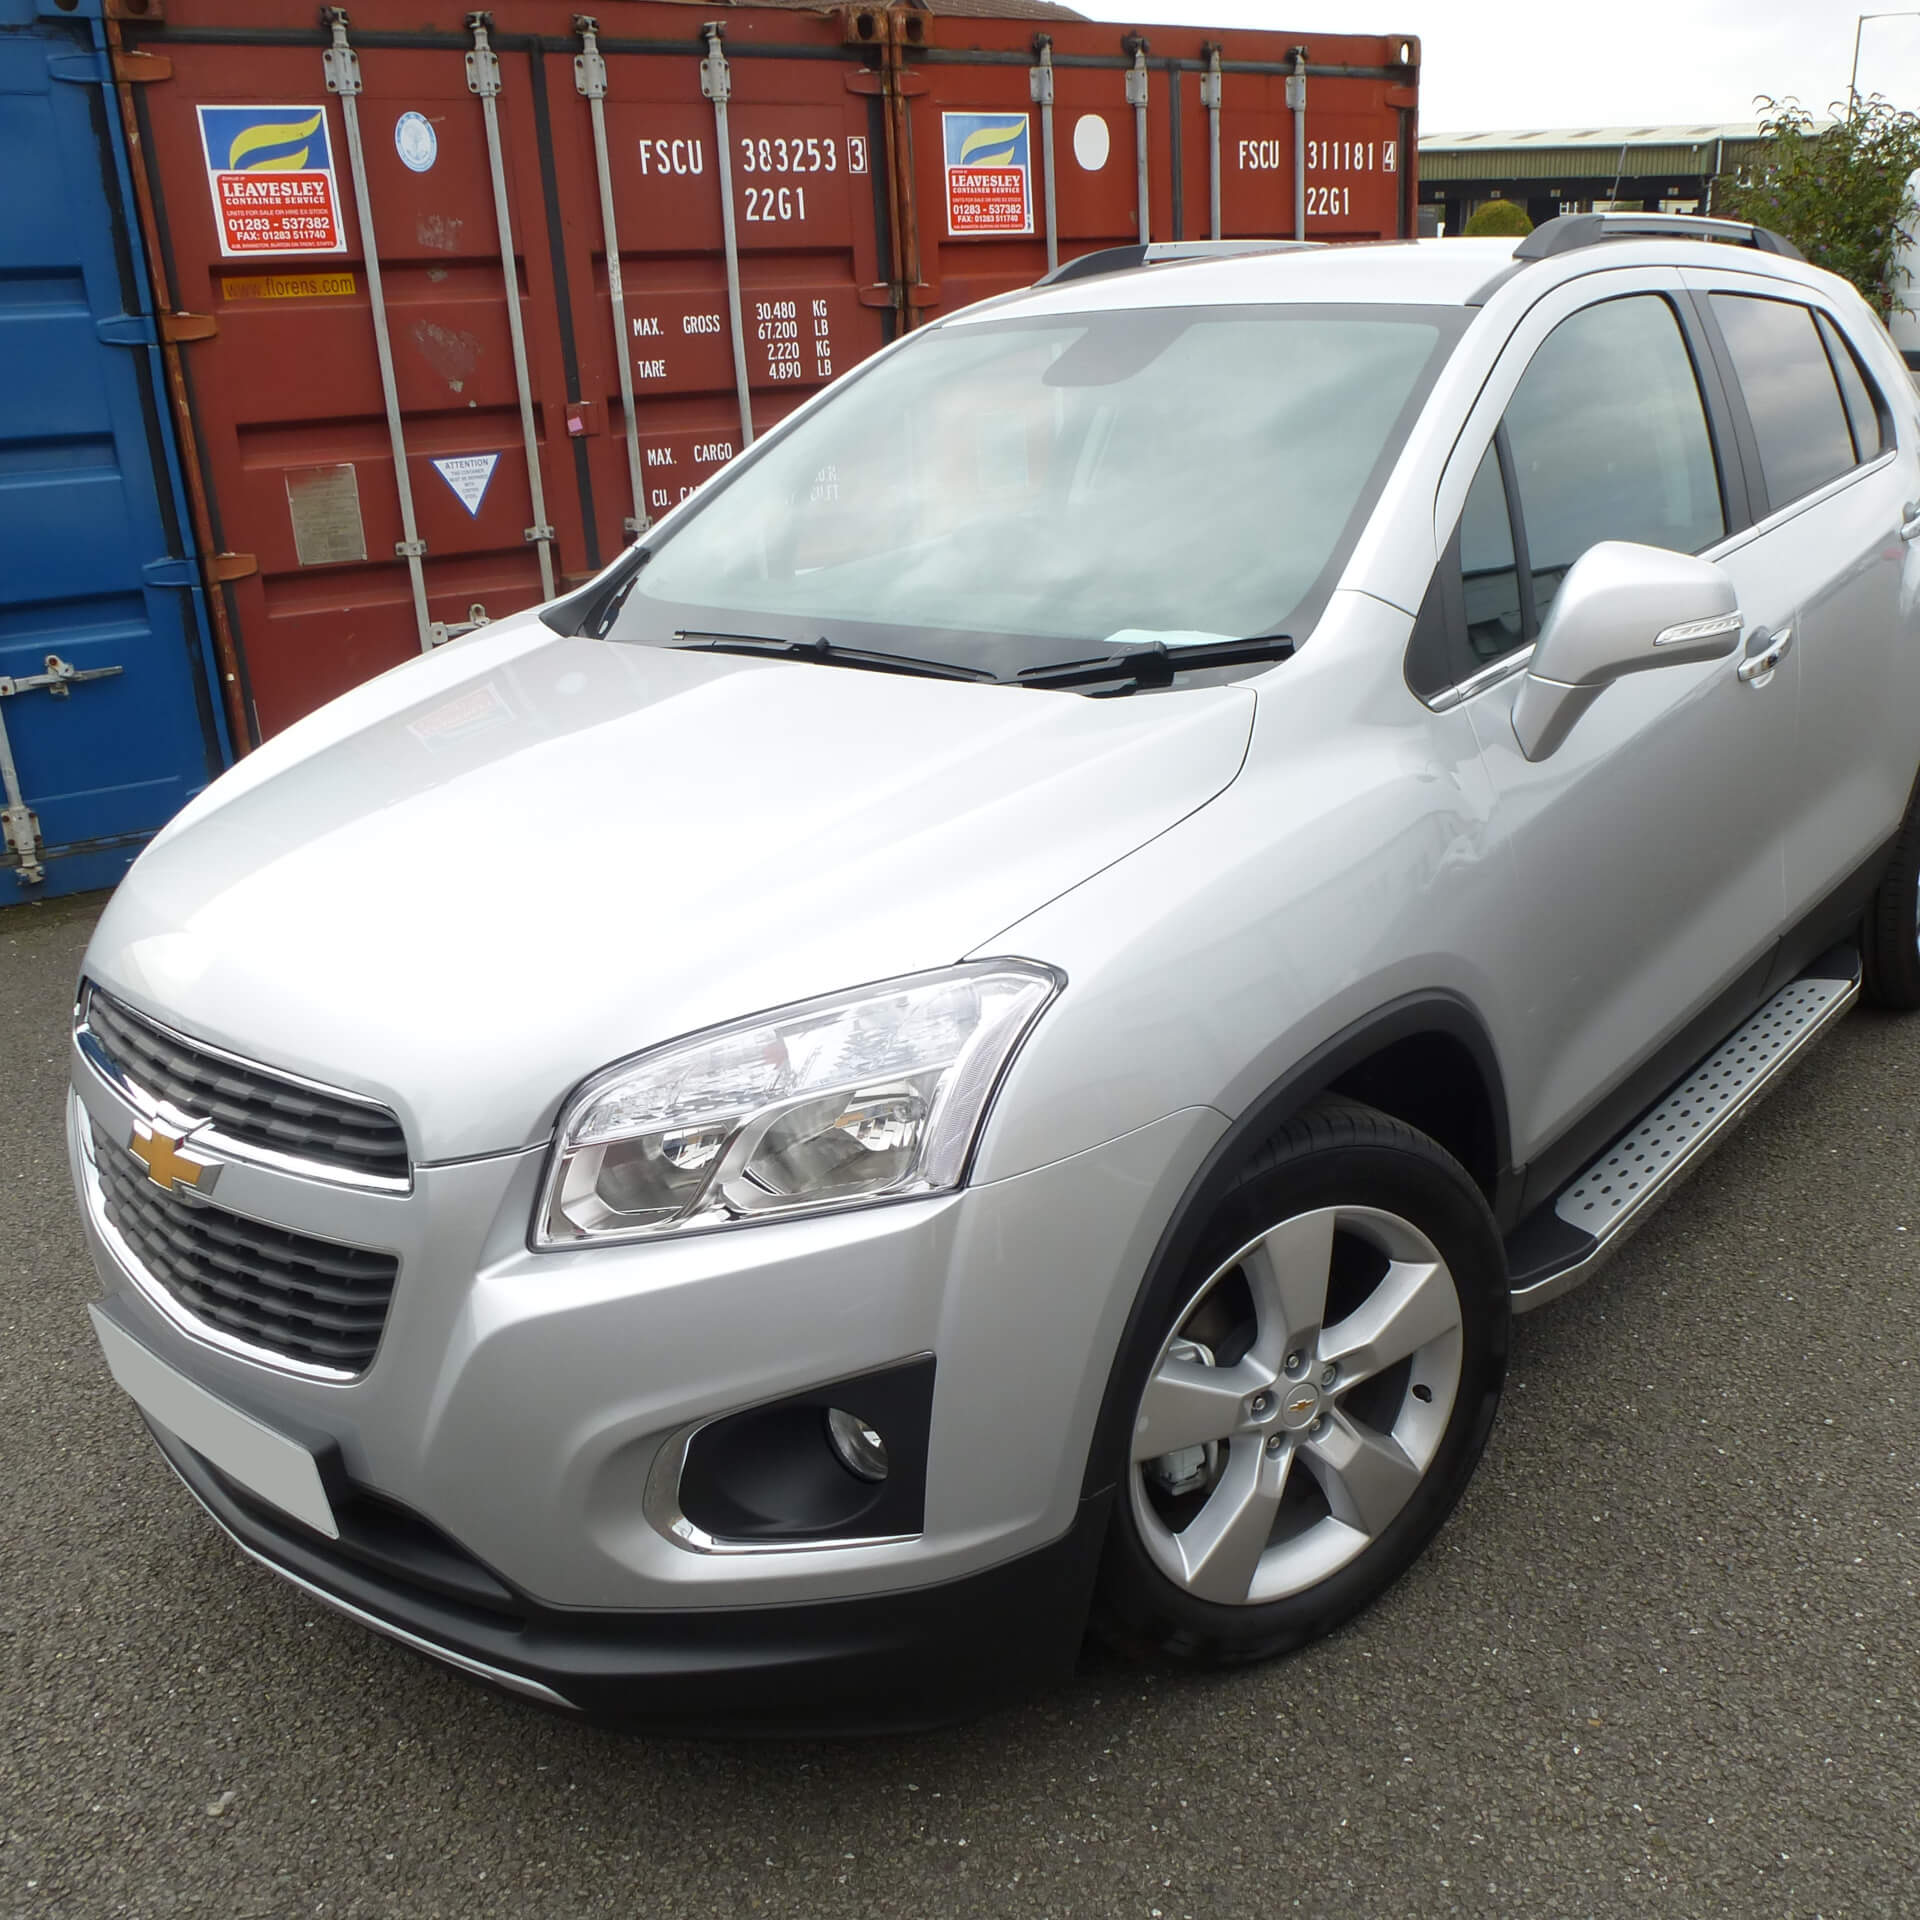 Direct4x4 accessories for Chevrolet Trax vehicles with a photo of a silver Chevrolet Trax with our freedom side steps fitted parked in front of shipping containers